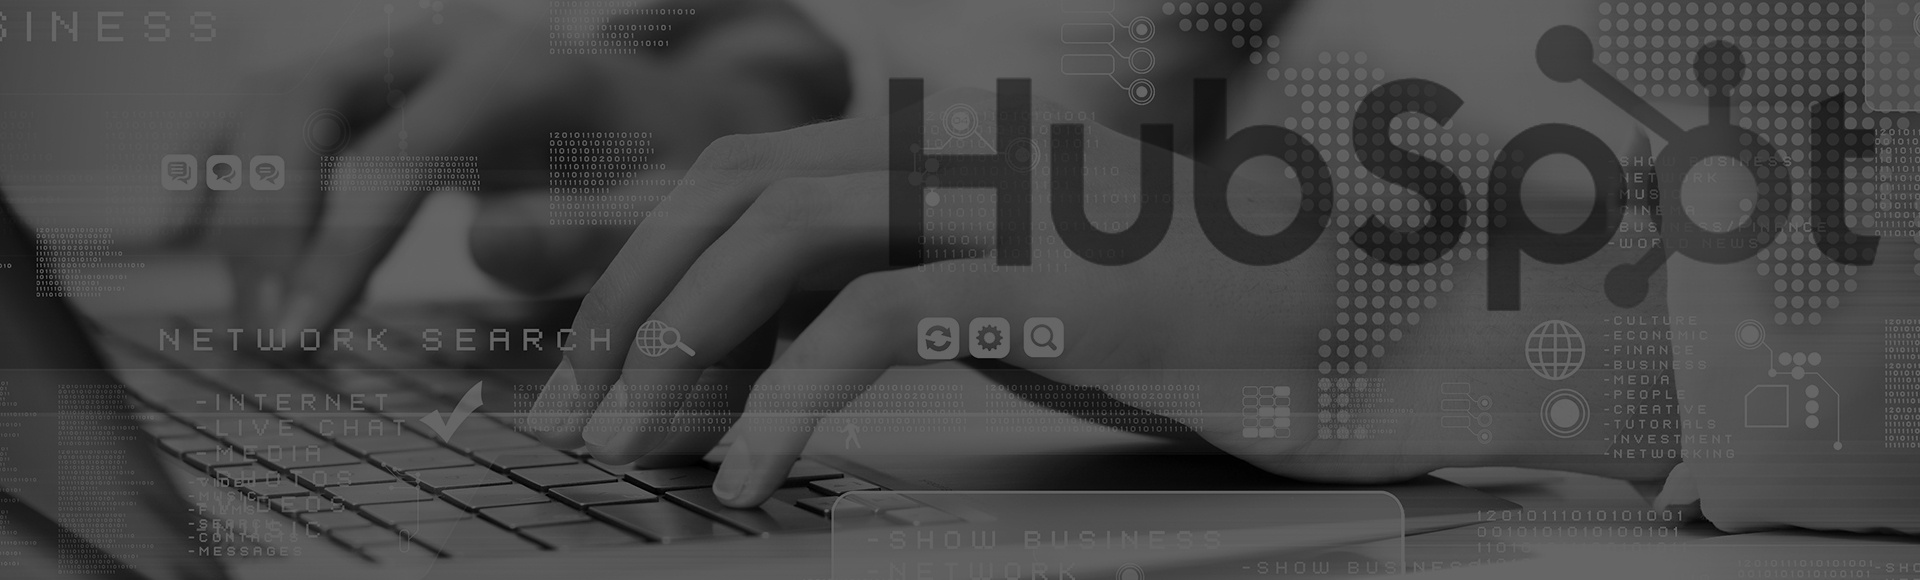 Lead-scoring-with-hubspot